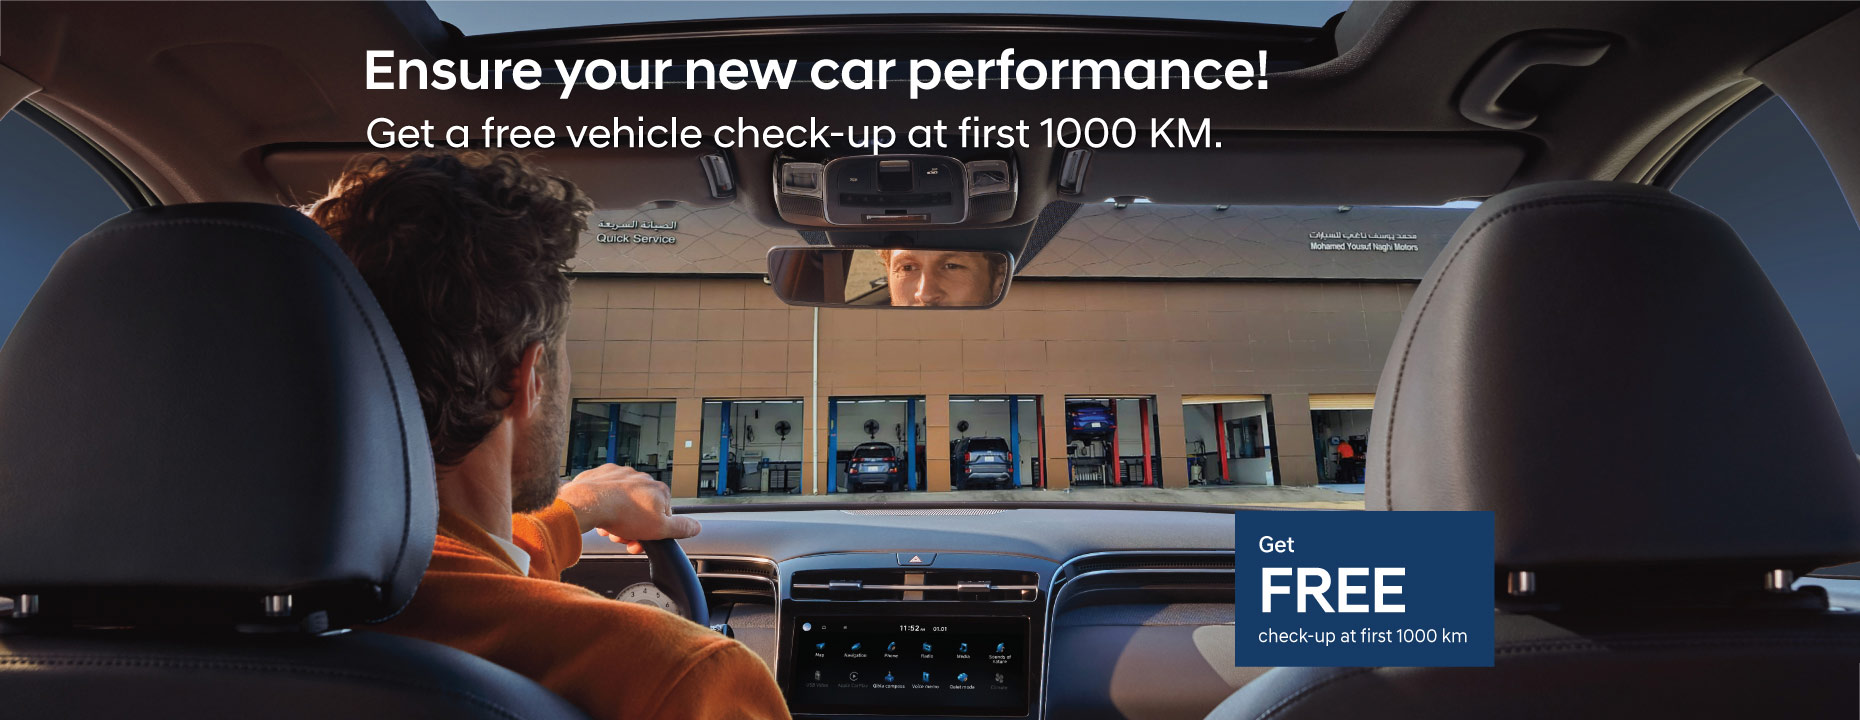 Ensure your new car performance! Get a first free vehicle check at 1000 km.